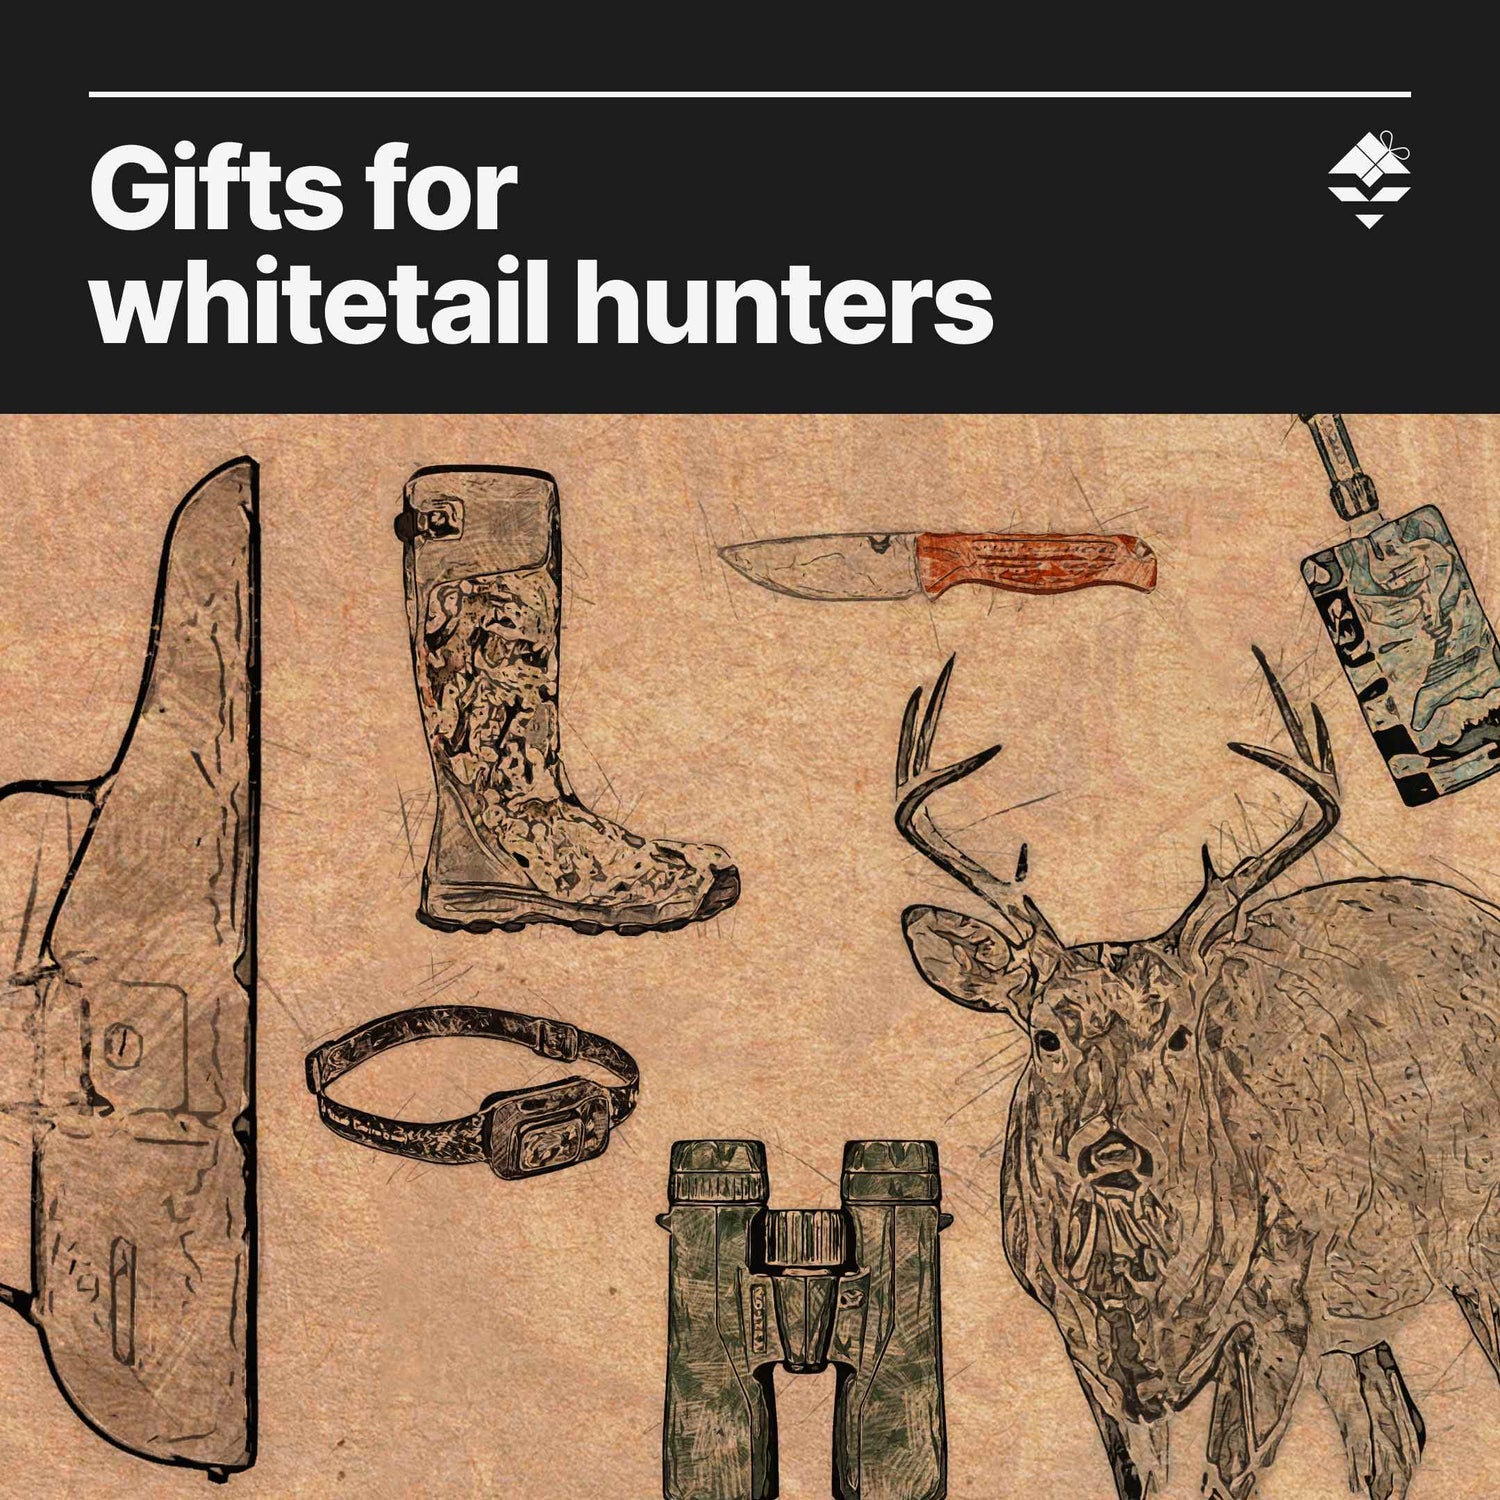 Gifts GOHUNT, hunting gifts